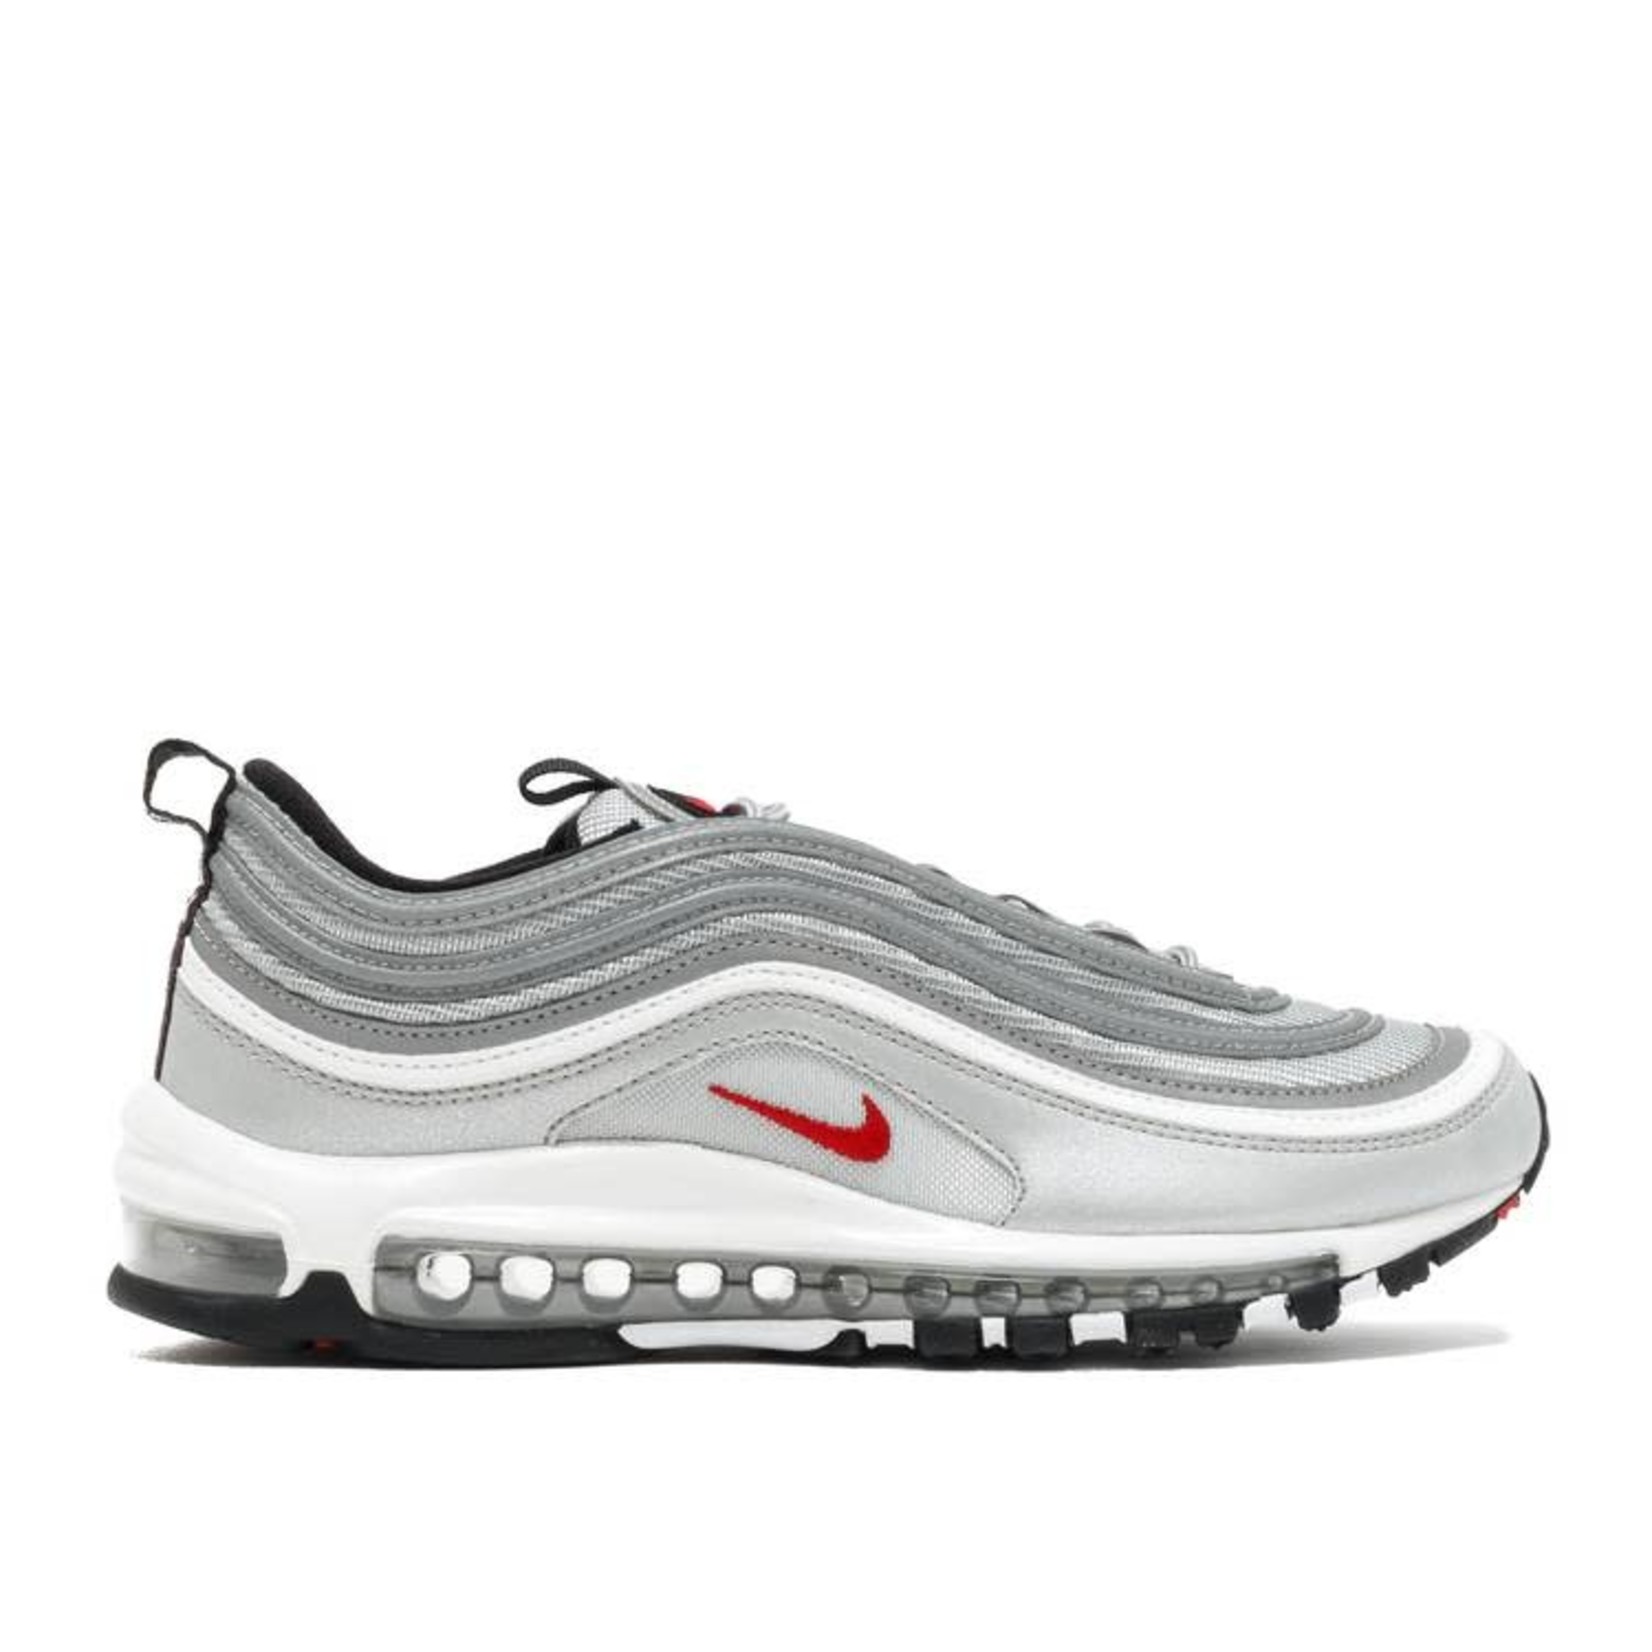 Nike Nike Air Max 97 Silver Bullet (2016/2017) Size 10, DS BRAND NEW